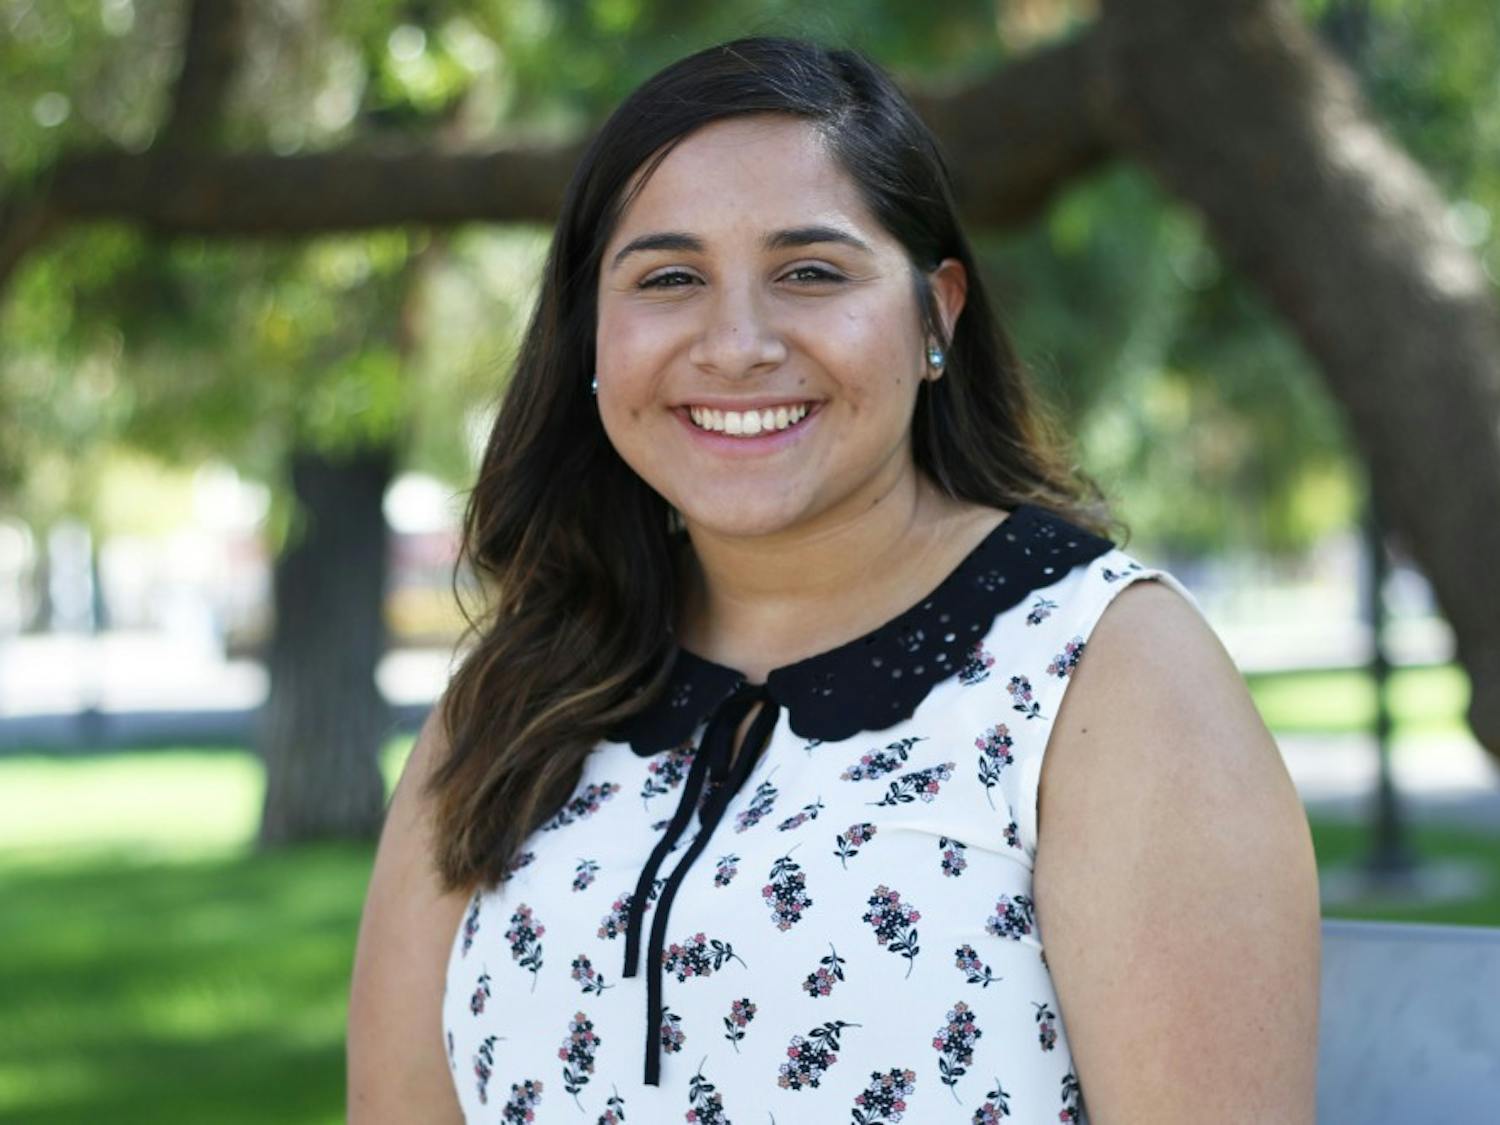 Leonela Urrutia, sophomore political science major, poses for a photo at the Tempe campus on Friday Oct. 21, 2016.